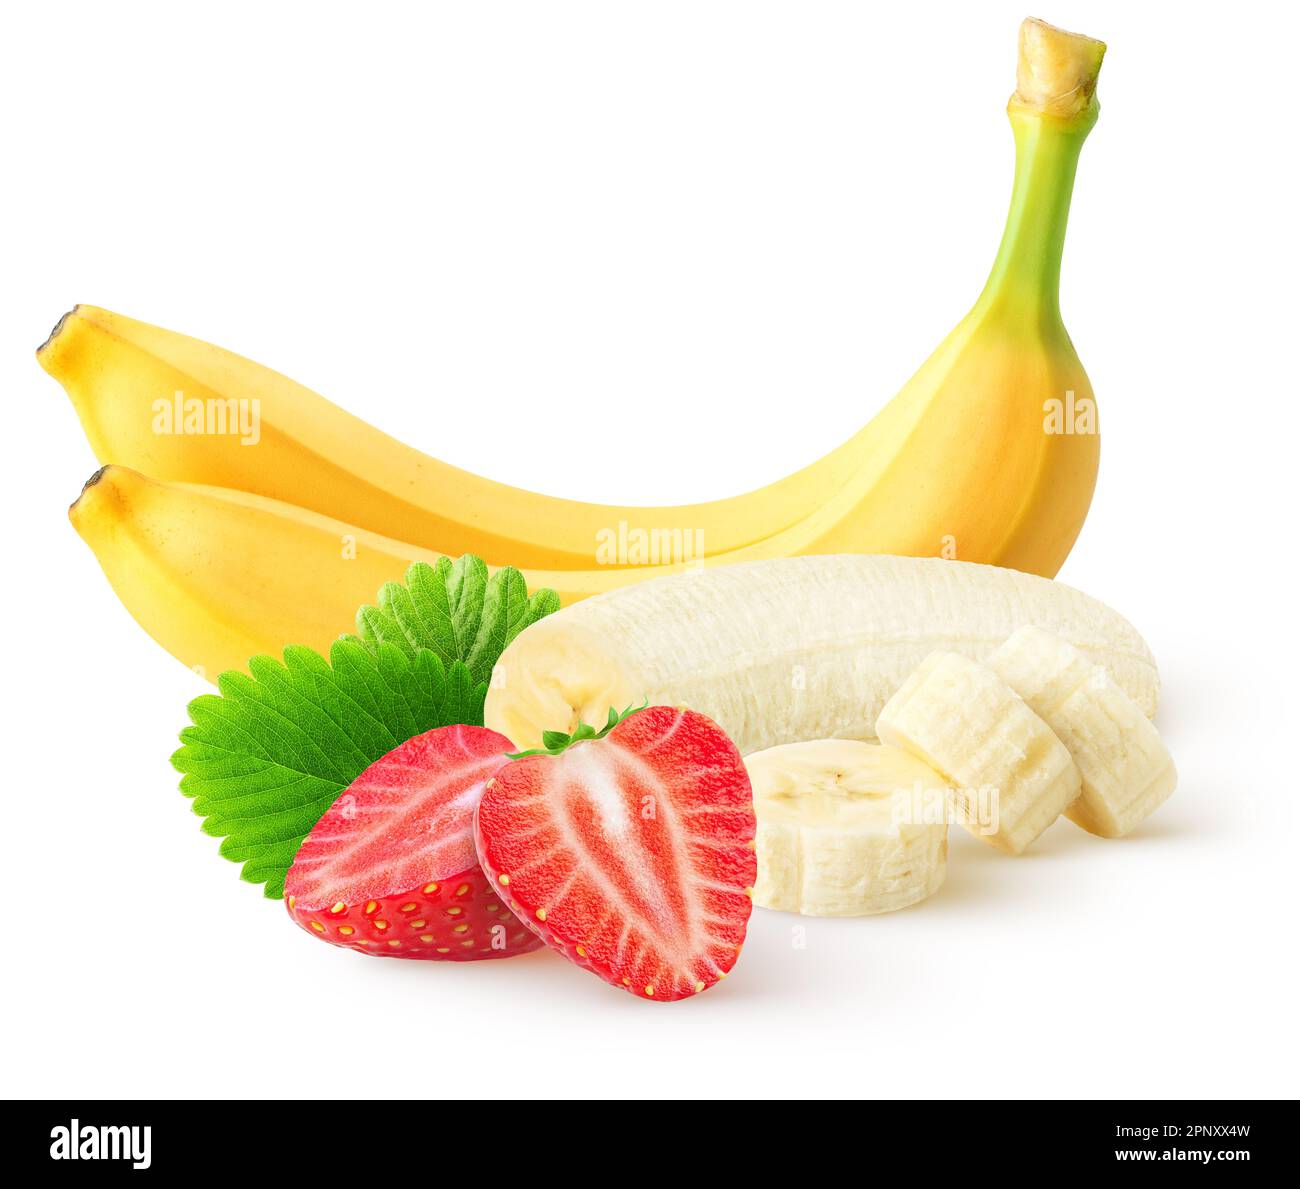 Isolated Fruits Peeled Bananas And Strawberries With Leaves Isolated